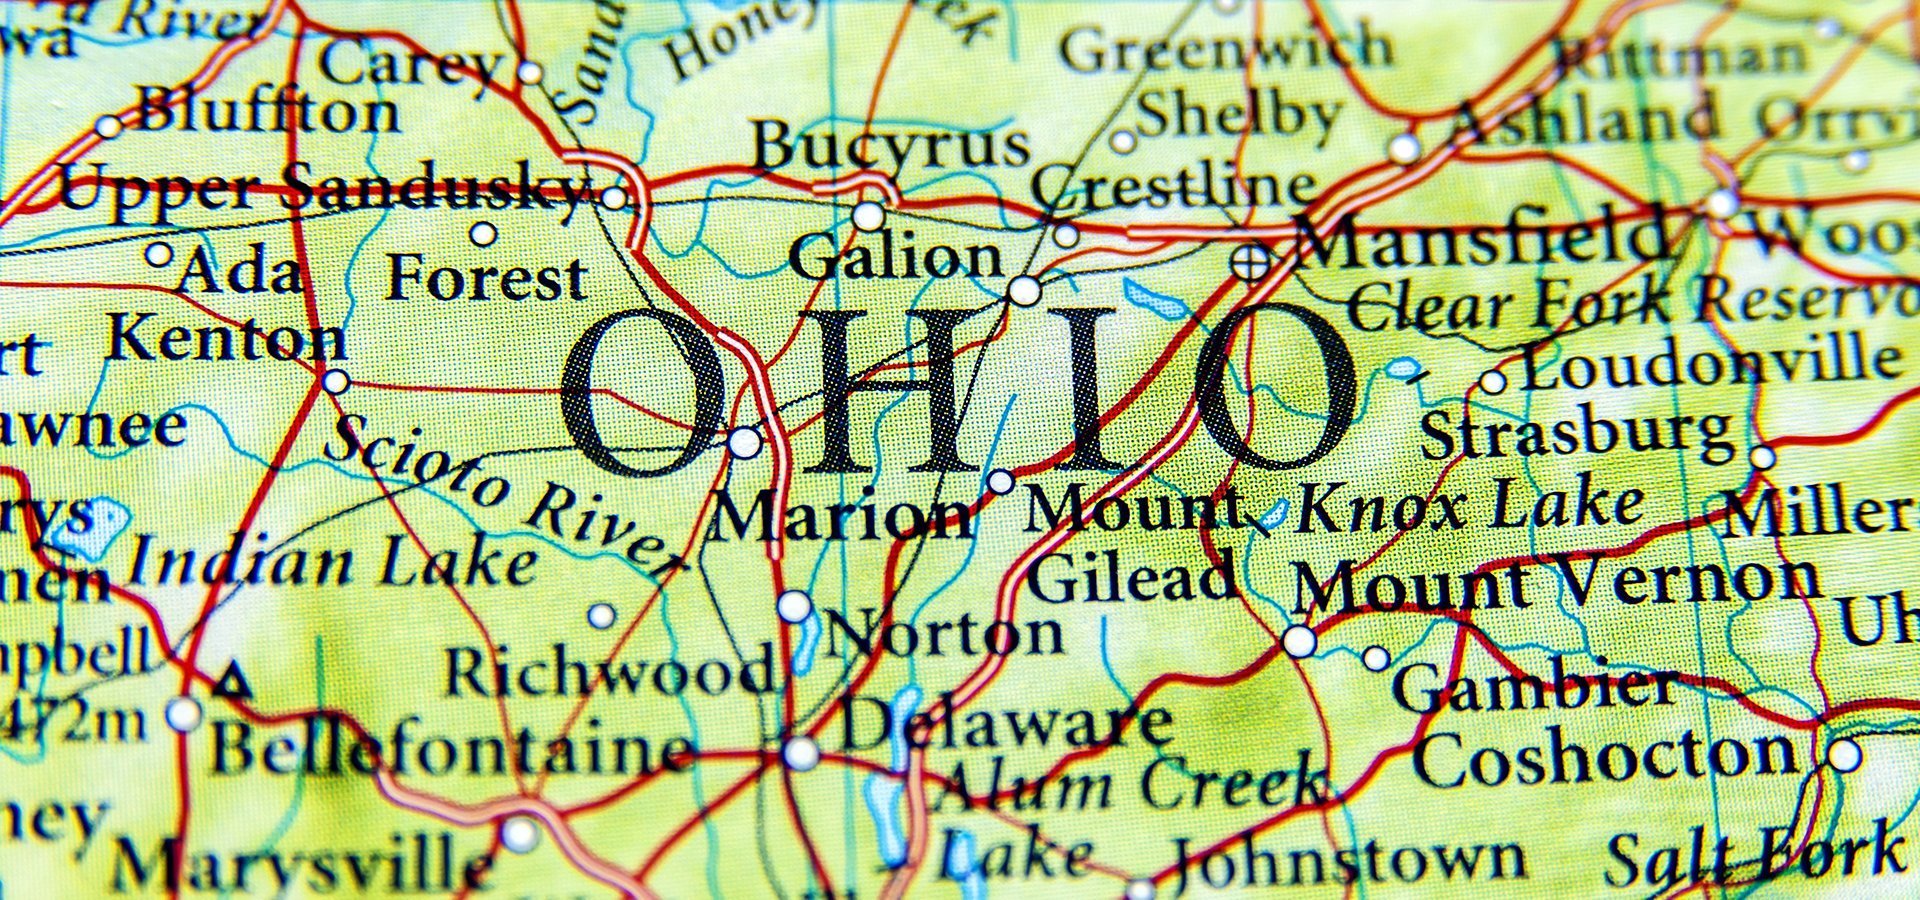 map of ohio makes people remember that toledo recovery community responds to millions of federal dollars to help combat opioids